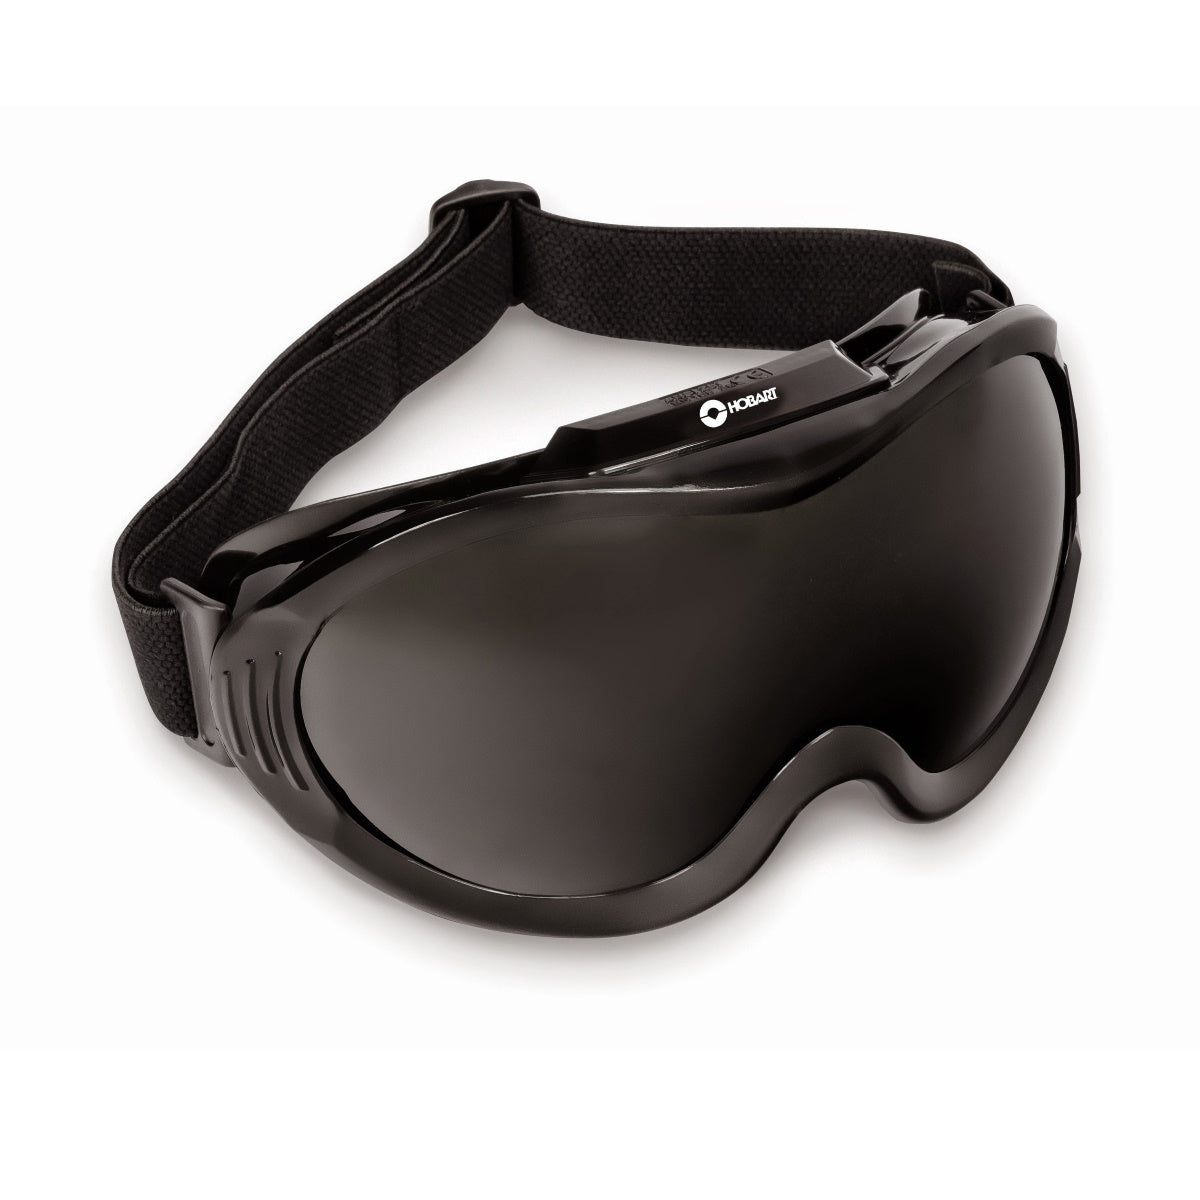 Hobart Shade 5 Wide View Safety Goggles (770818)